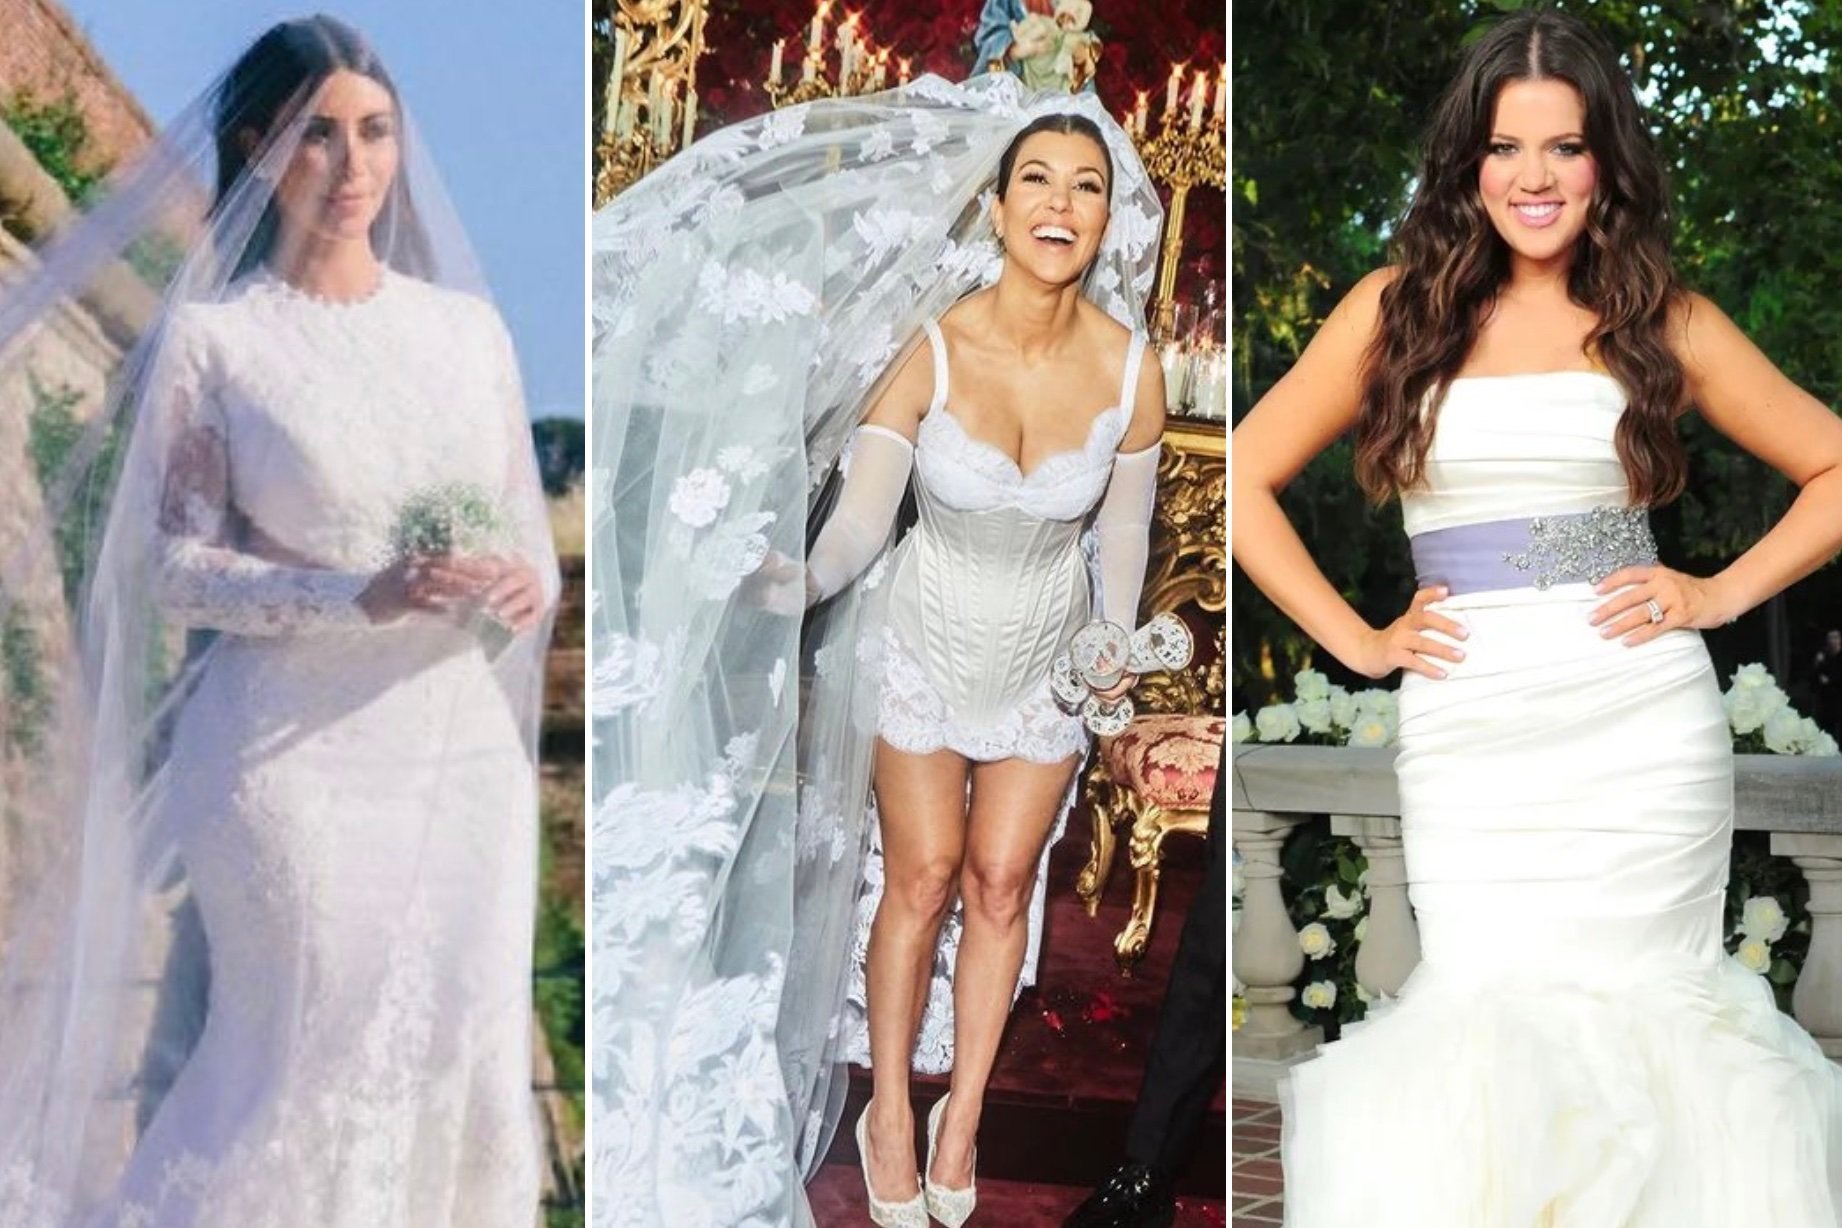 8 Kardashian wedding dresses, from Kourtney and Travis Barker's Dolce & Gabbana to Vera Wang for Kim and Khloé – and don't underestimate Kylie and Kendall Jenner's bridal style